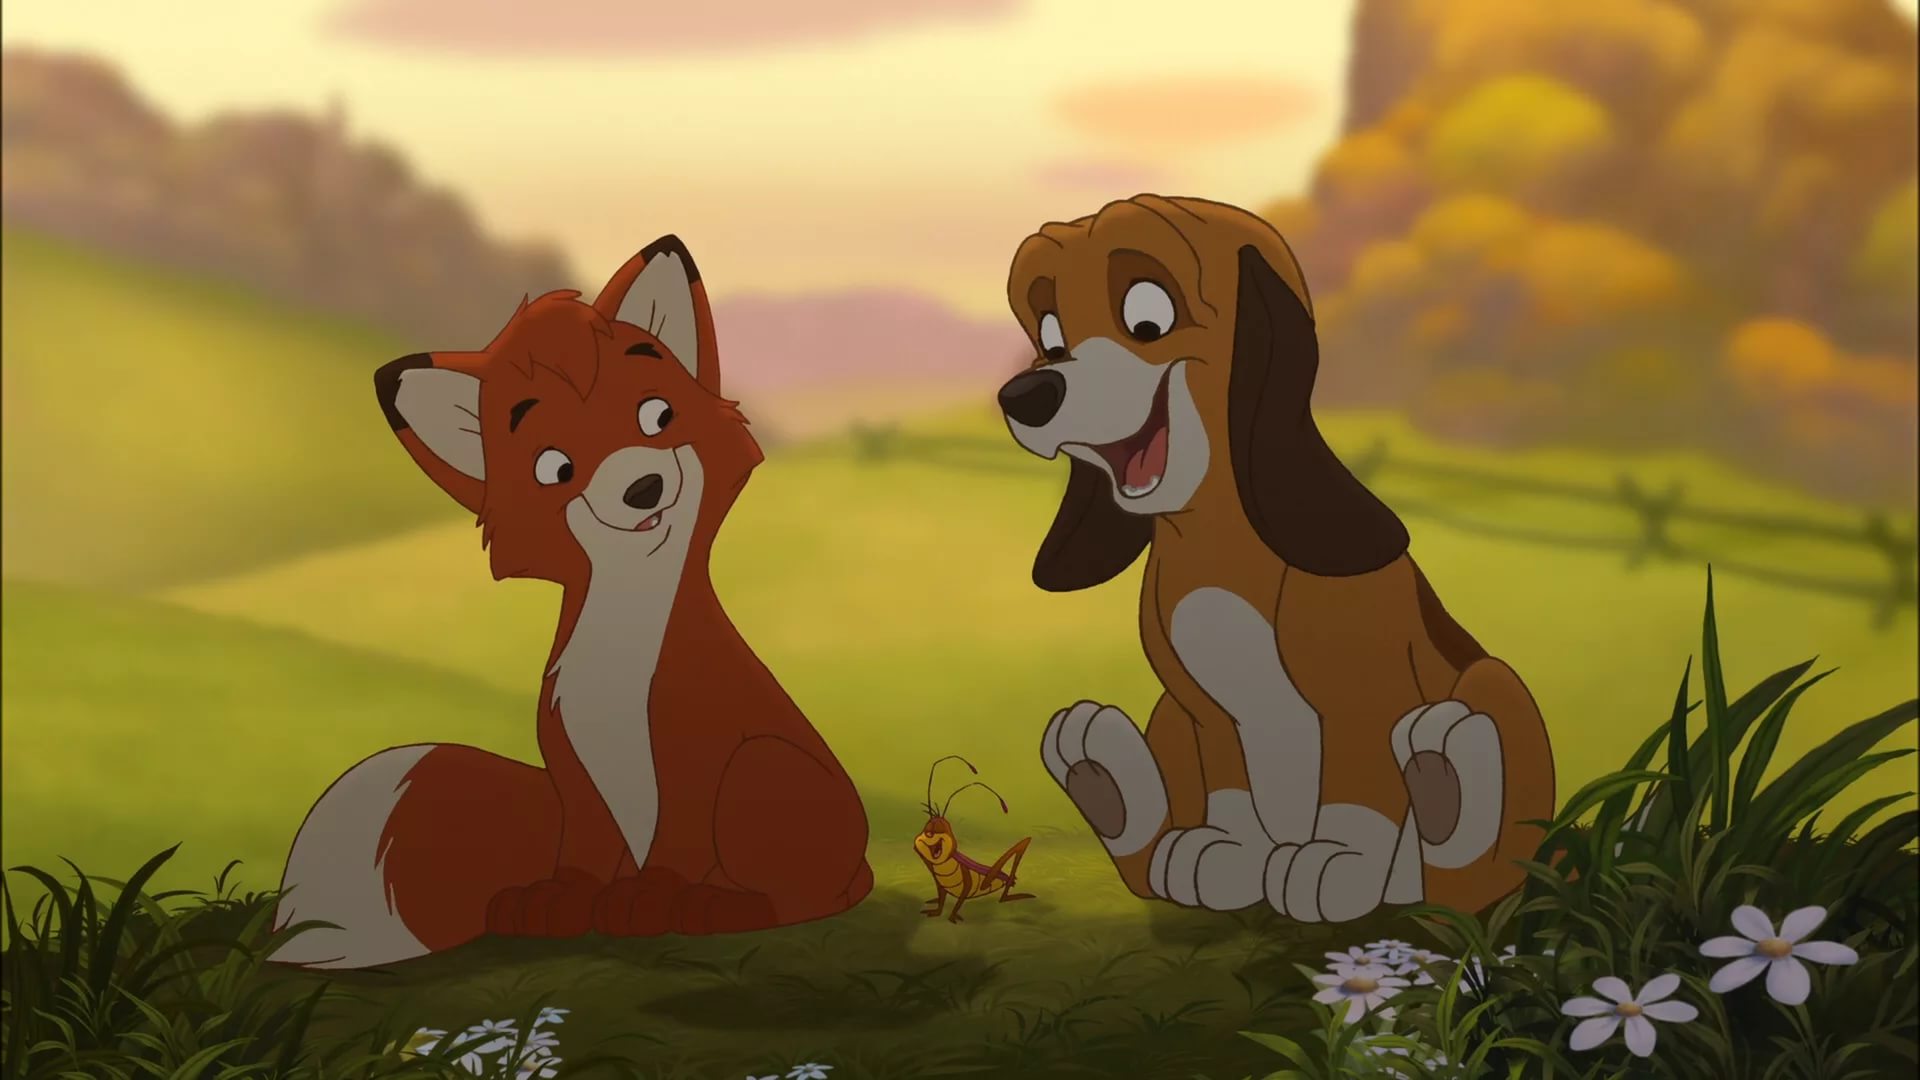 The Fox and the Hound Wallpapers High Quality | Download Free